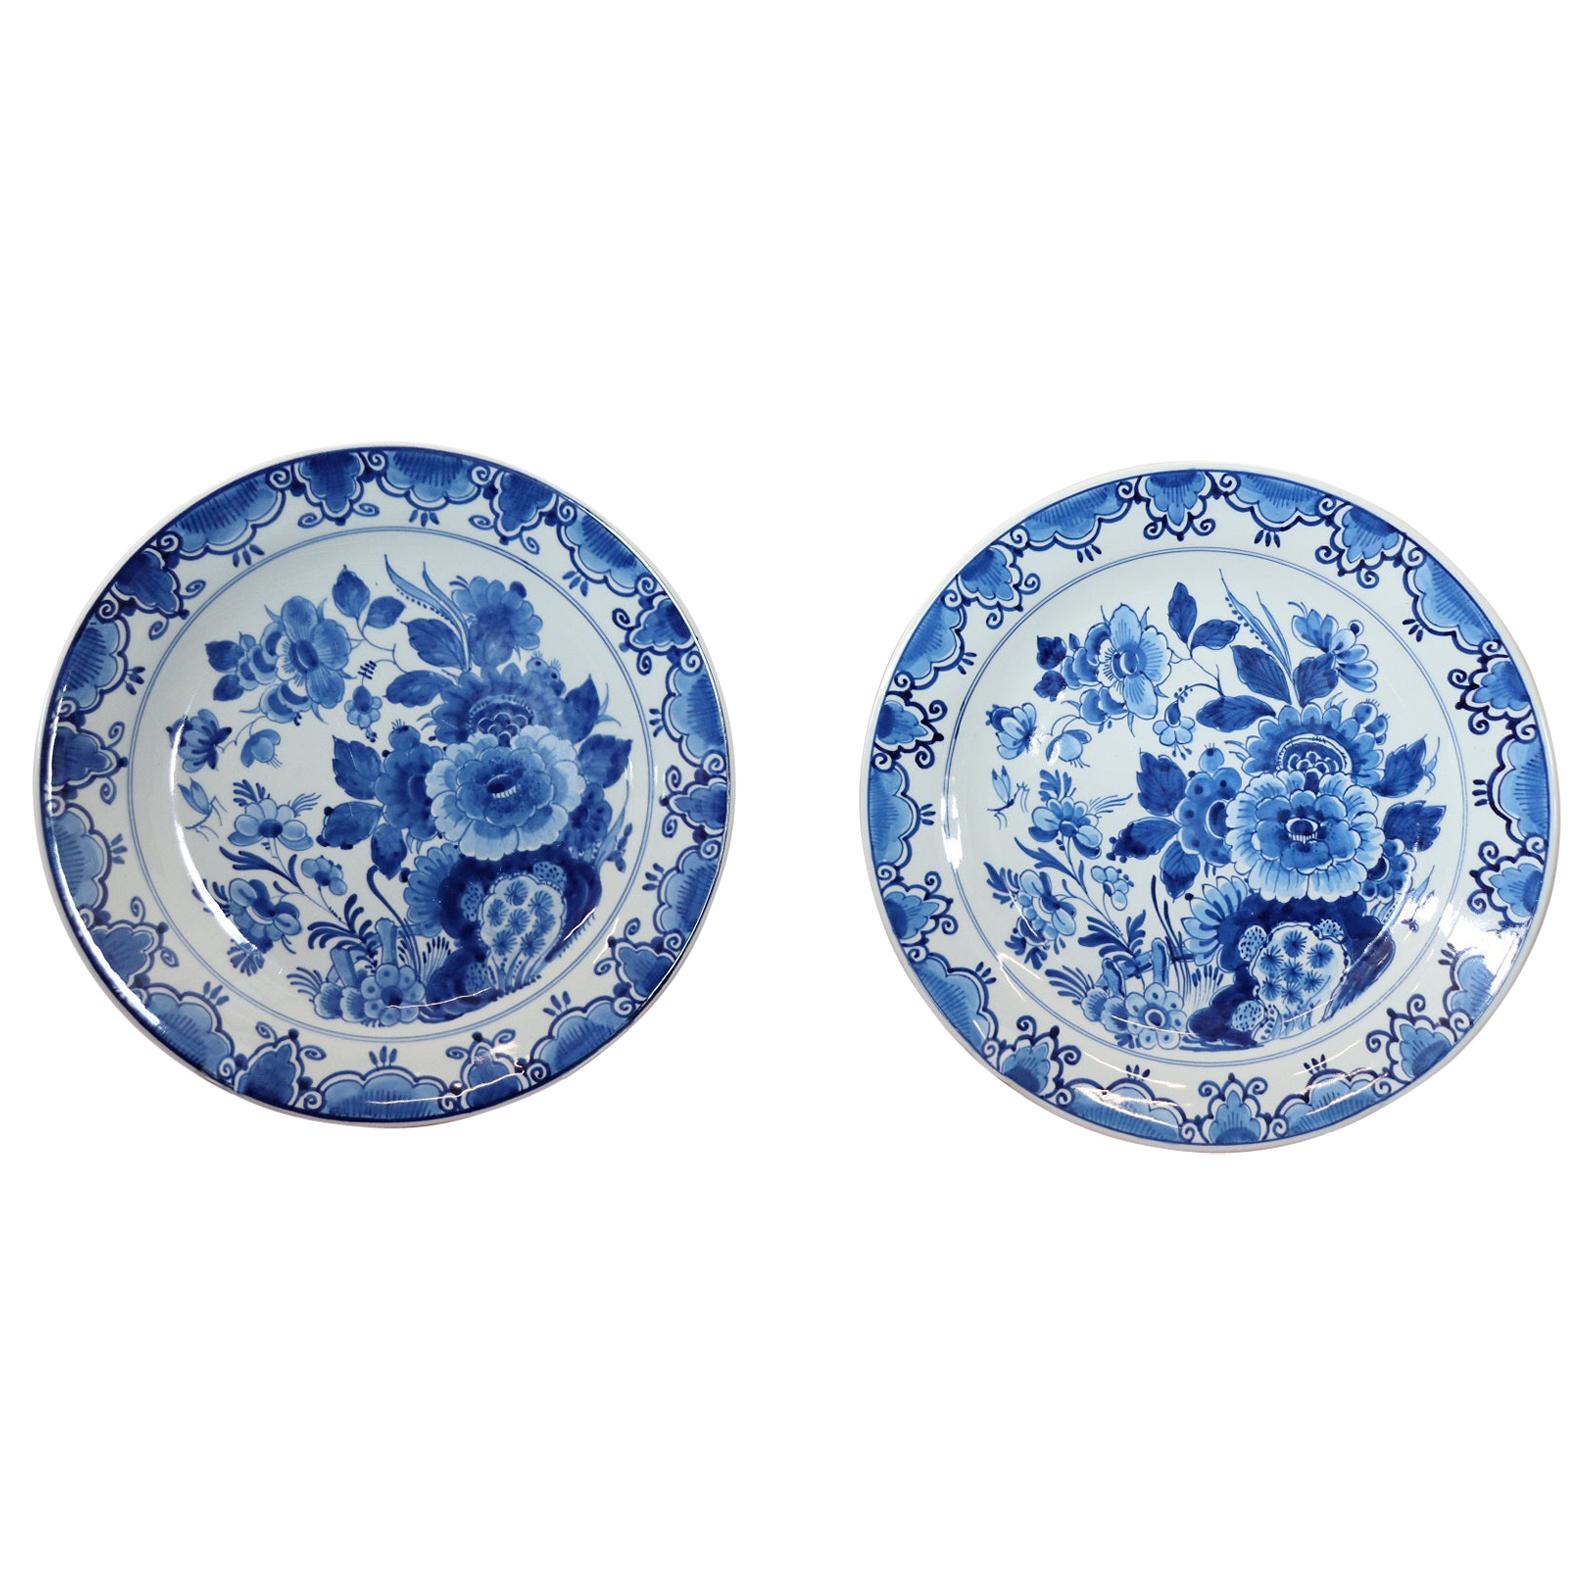 20th Century Holland Ceramic Platters with Blue Floreal Decorations by Delft For Sale